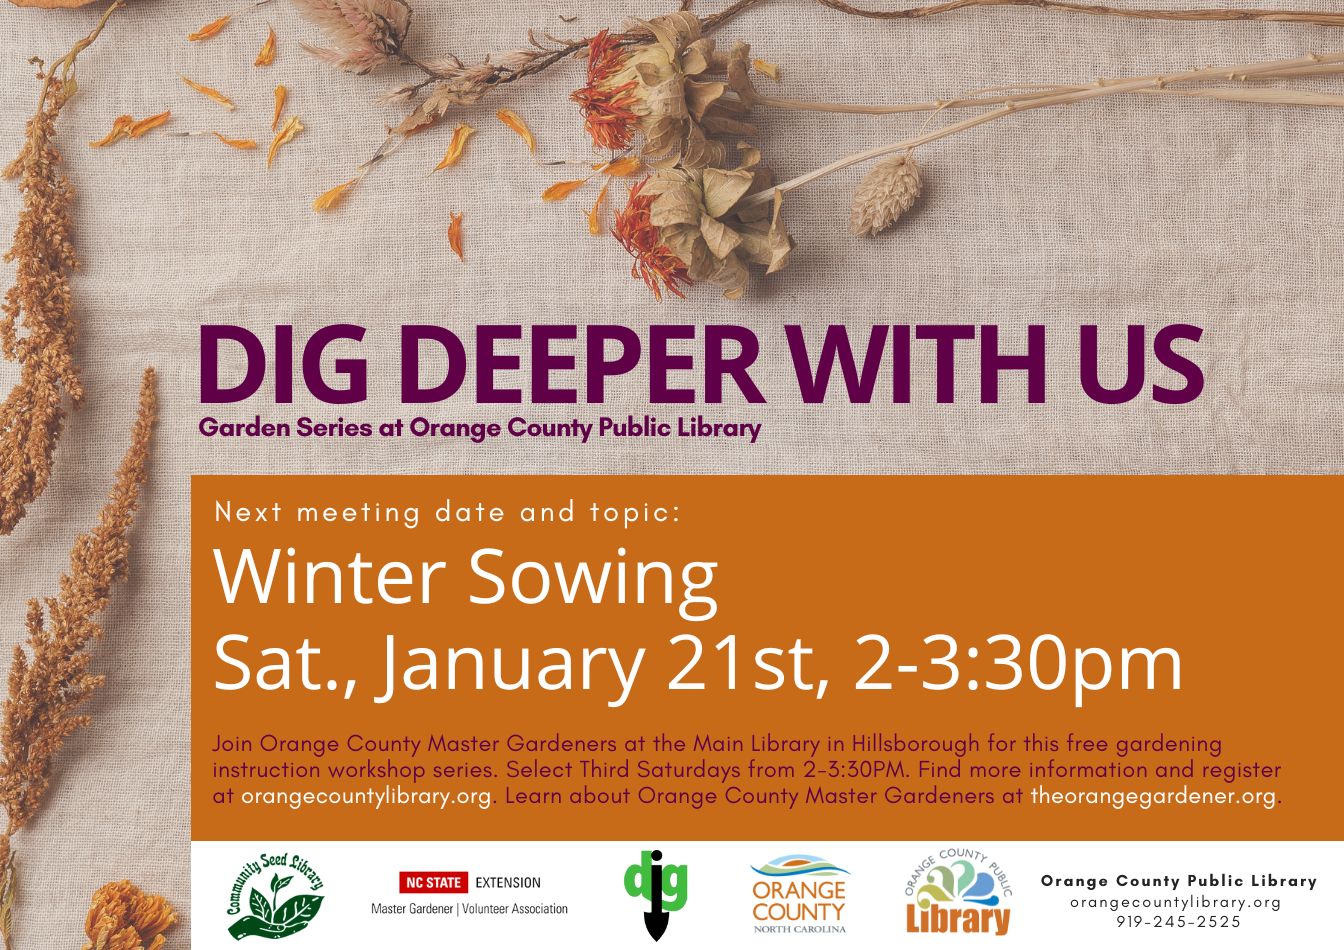 Join the Orange County Master Gardeners for a series of gardening lectures and workshops and pick up free seeds. Occurring on select third Saturdays of the month from 2pm-3:30pm, this series is free and open to gardeners at all levels of experience. Registration is preferred. Visit theorangegardener.org to learn more about the Orange County Master Gardeners.  This month's topic: Winter Sowing